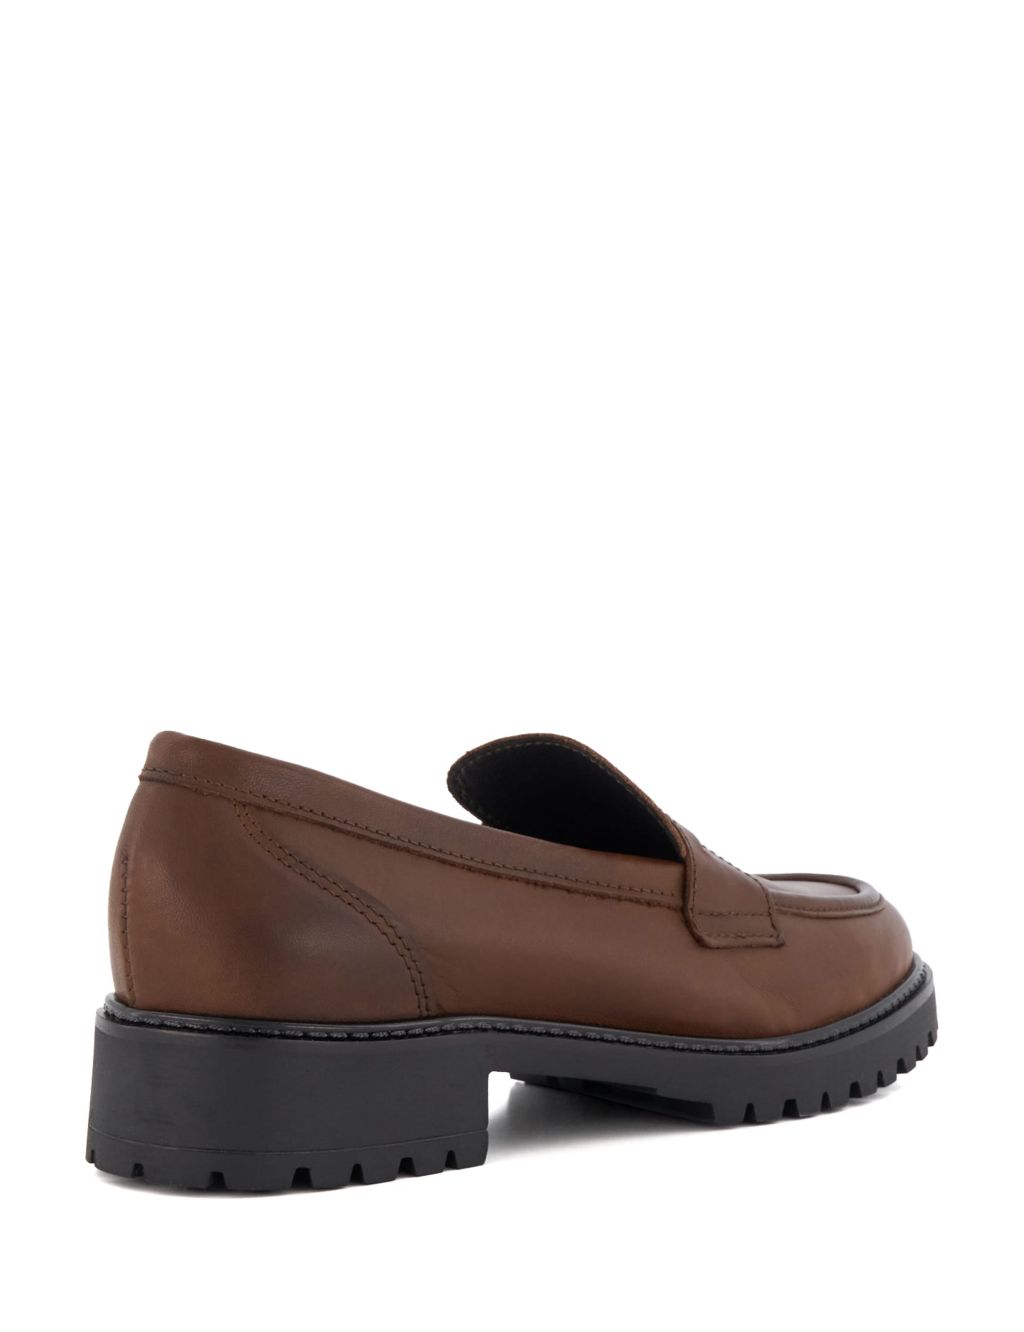 Leather Slip On Loafers image 3